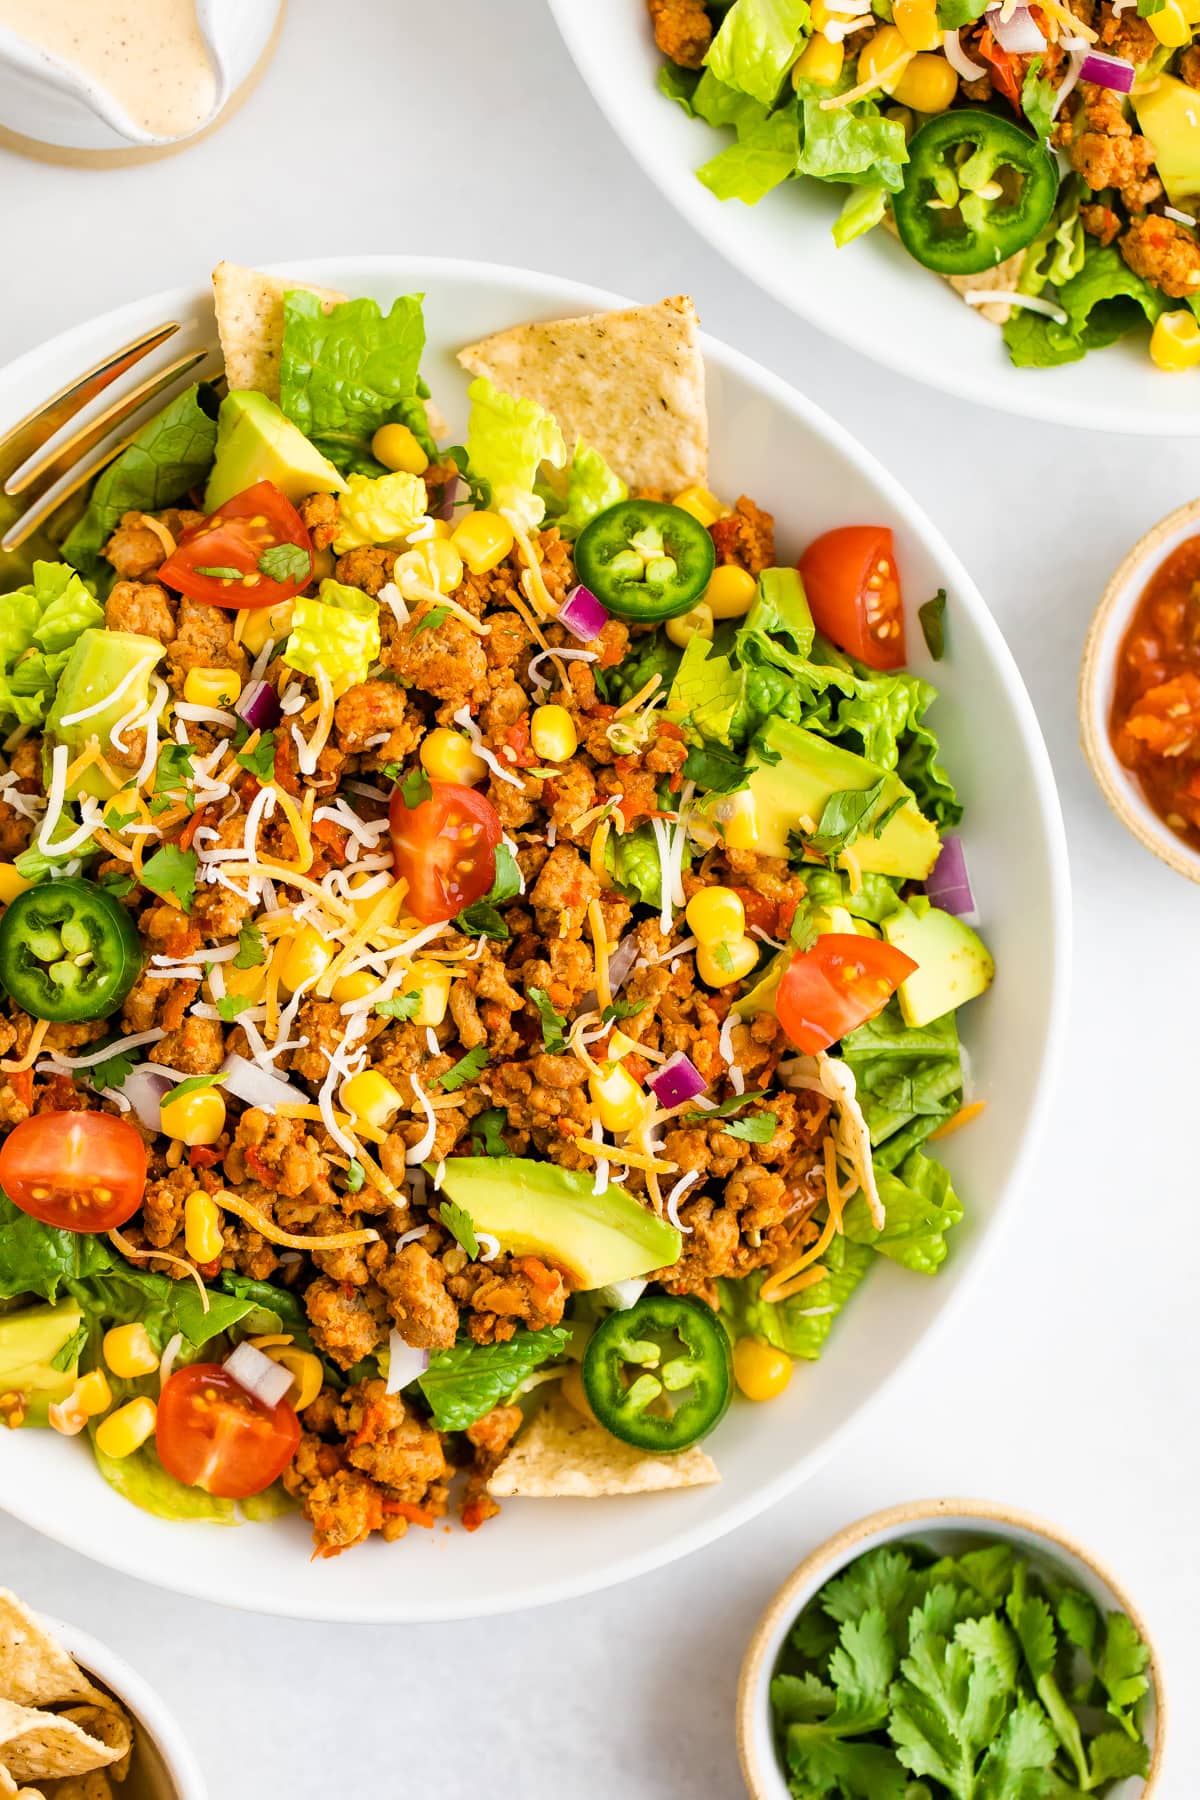 Taco salad topped with ground turkey, avocado, corn, peppers, chips and tomatoes.